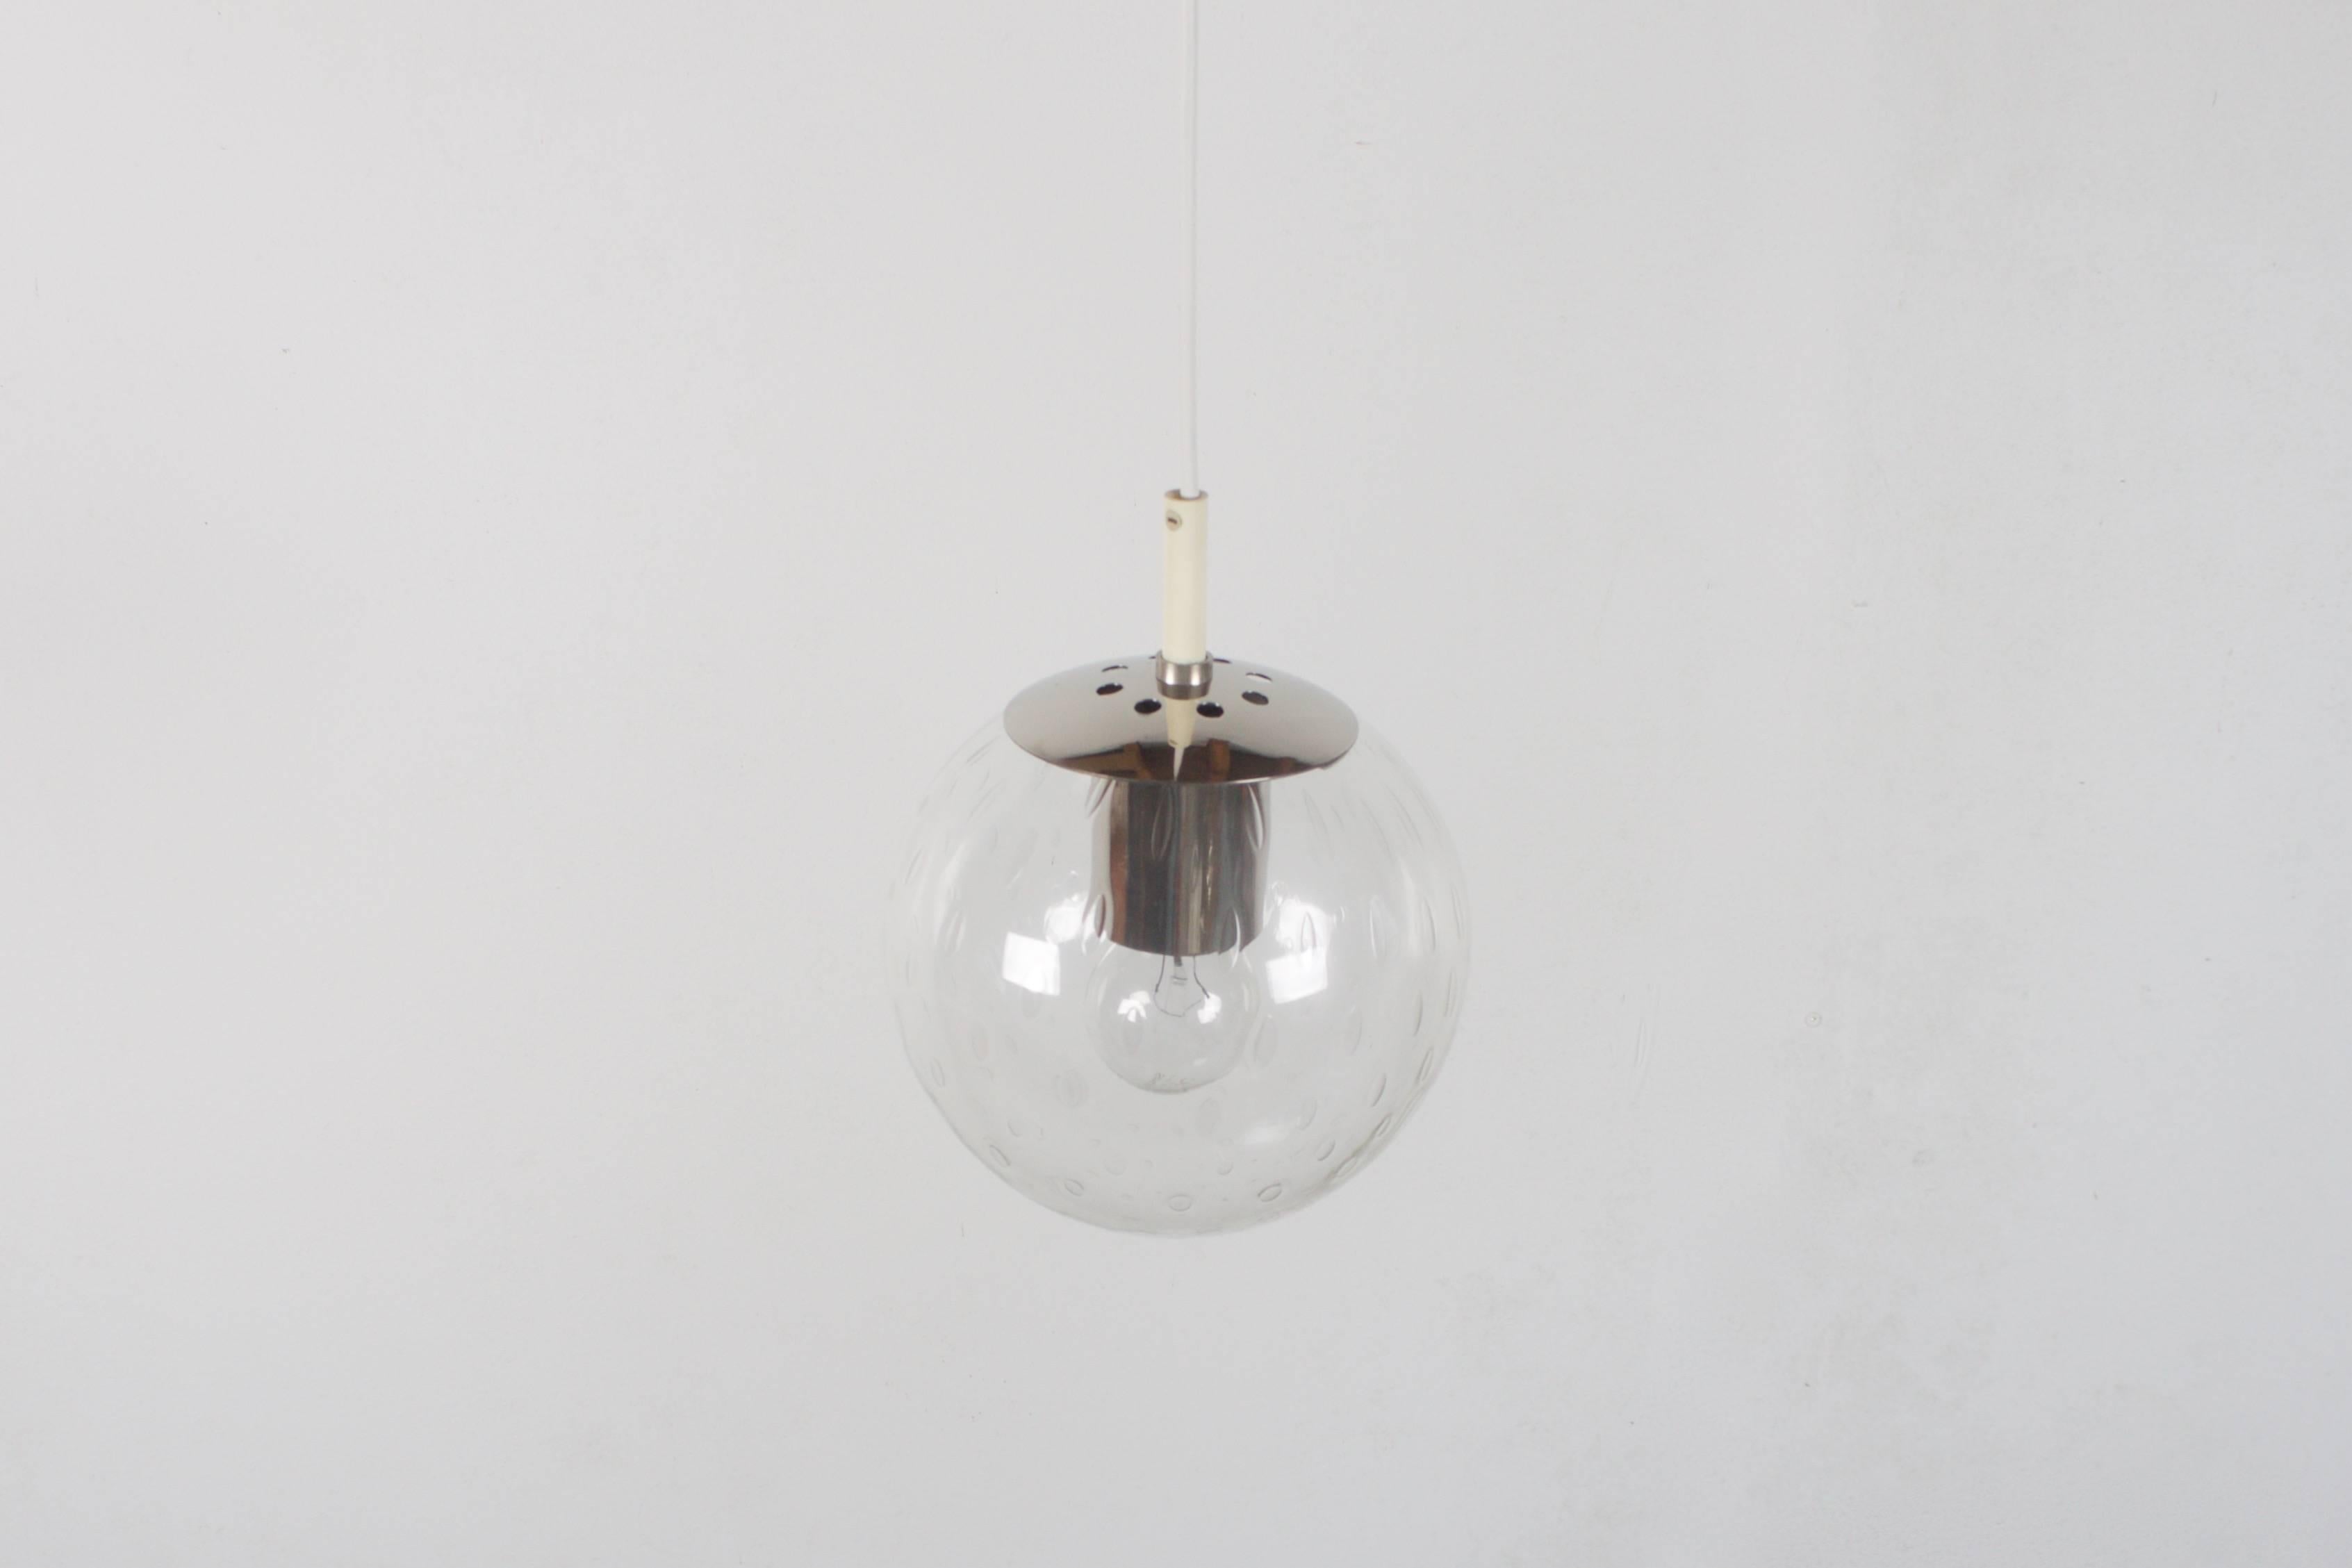 Small ‘Light-drops’ Pendant by RAAK Amsterdam in very good condition.

Six available.

Handblown glass 18 cm. (7 Inch) globe with a teardrop pattern trapped inside the glass. 

The pattern in the globes creates a spectaculair effect when